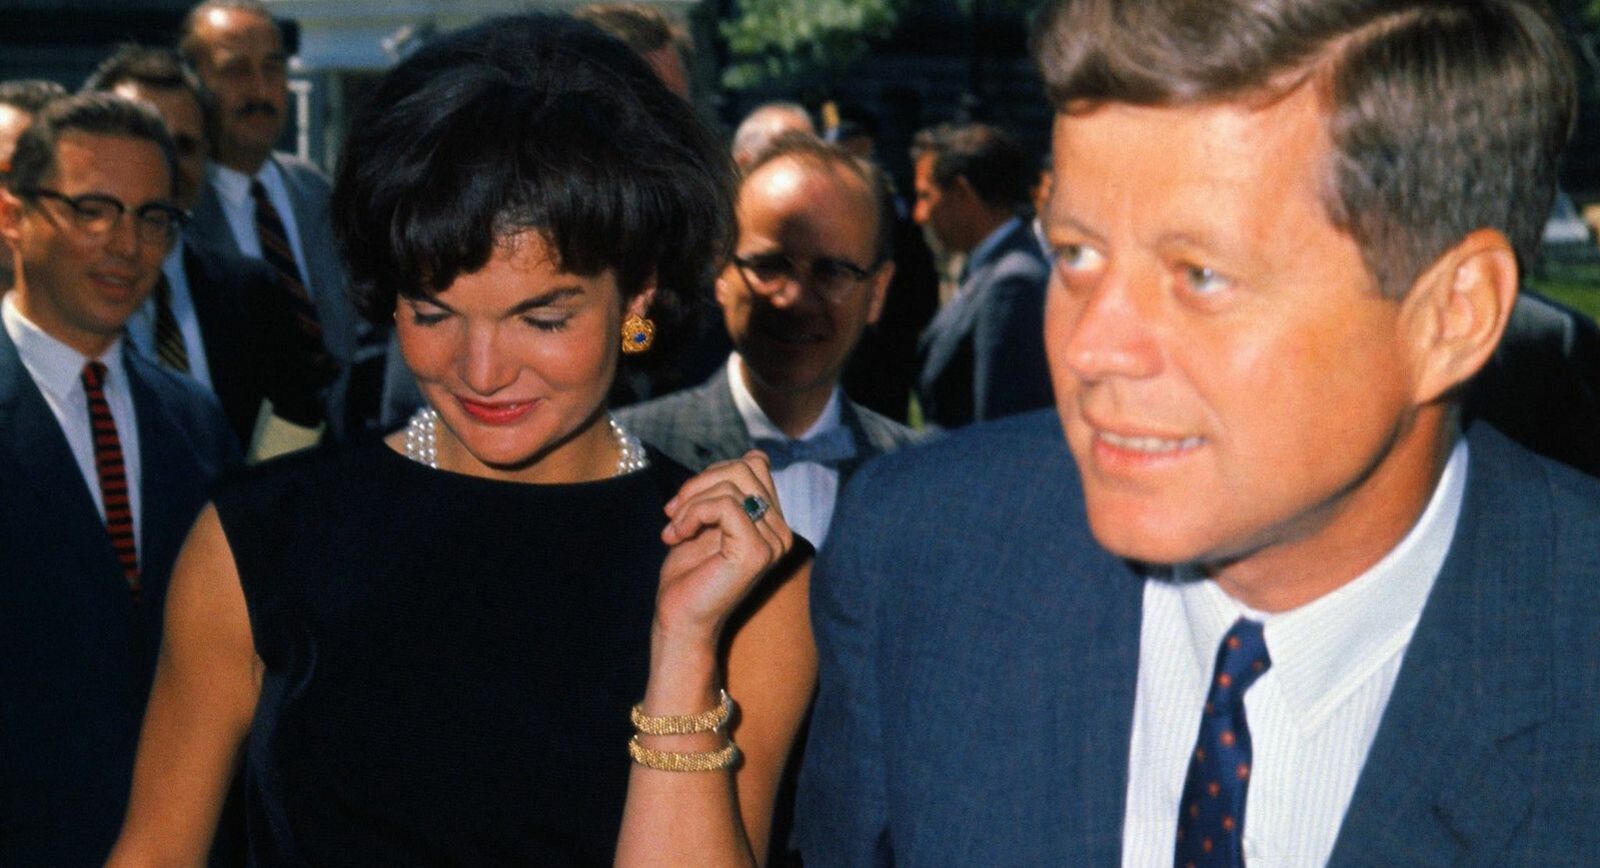 Jackie Kennedy wearing her famous emerald and diamond engagement ring by Van Cleef & Arpels 